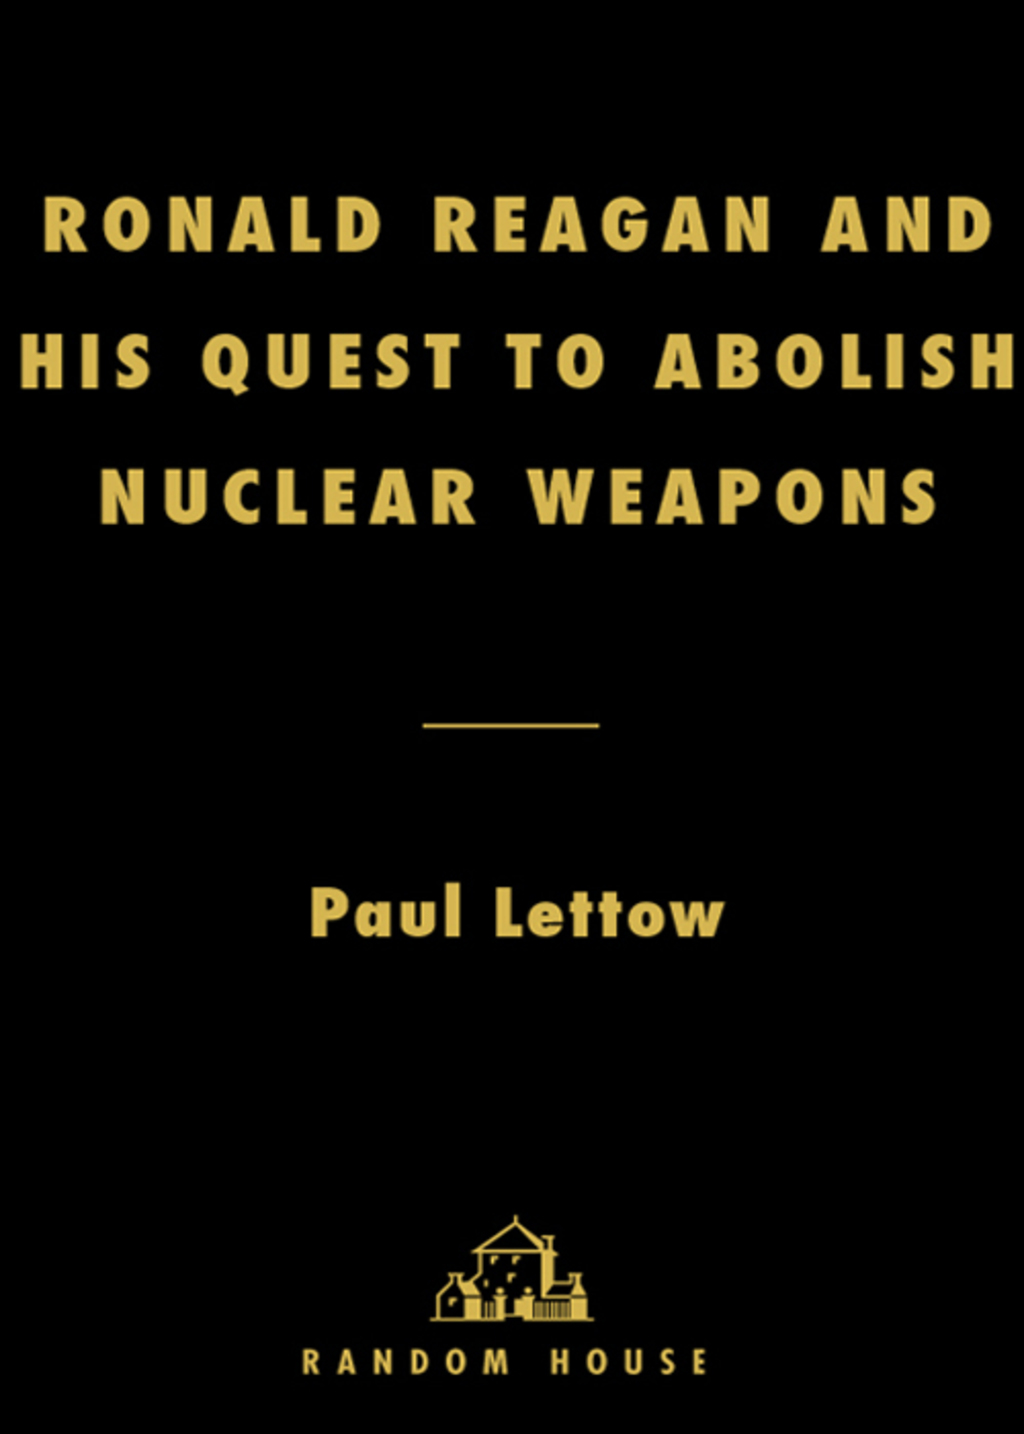 Ronald Reagan and His Quest to Abolish Nuclear Weapons (eBook) - Paul Lettow,